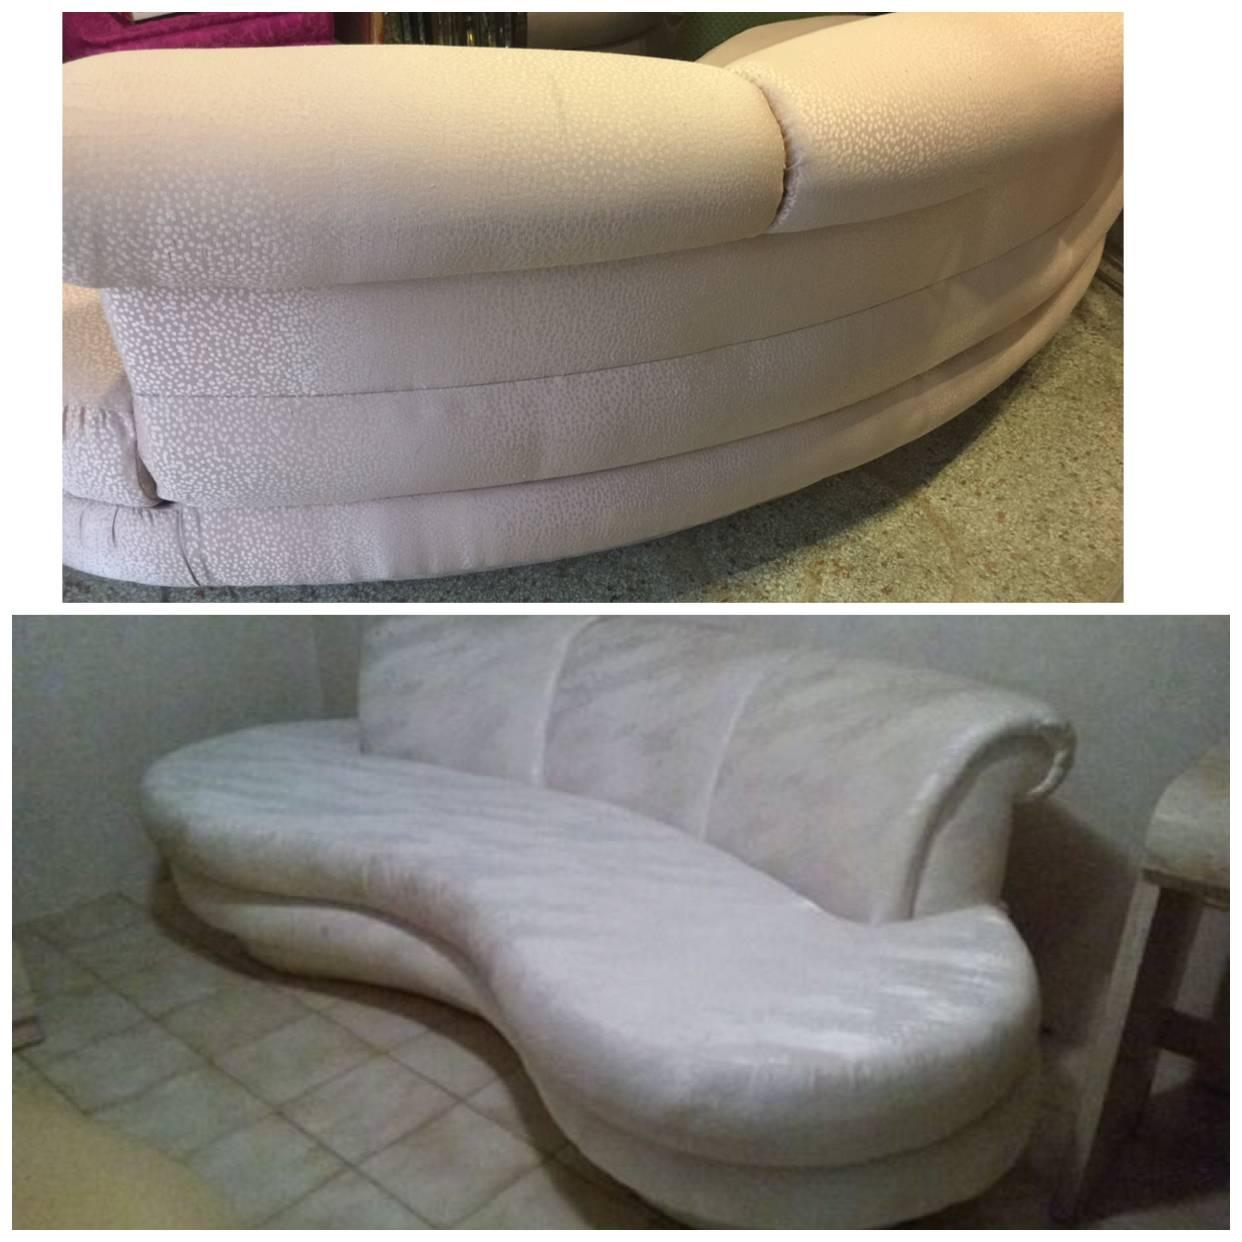 Vintage 1980s Adrian Pearsall for Comfort Designs curved, Kidney shaped, cloud sofas. One is a light pink and the other is cream. The fabric is original and will need new upholstery if you want the pair to match. Listing is per sofa. 
